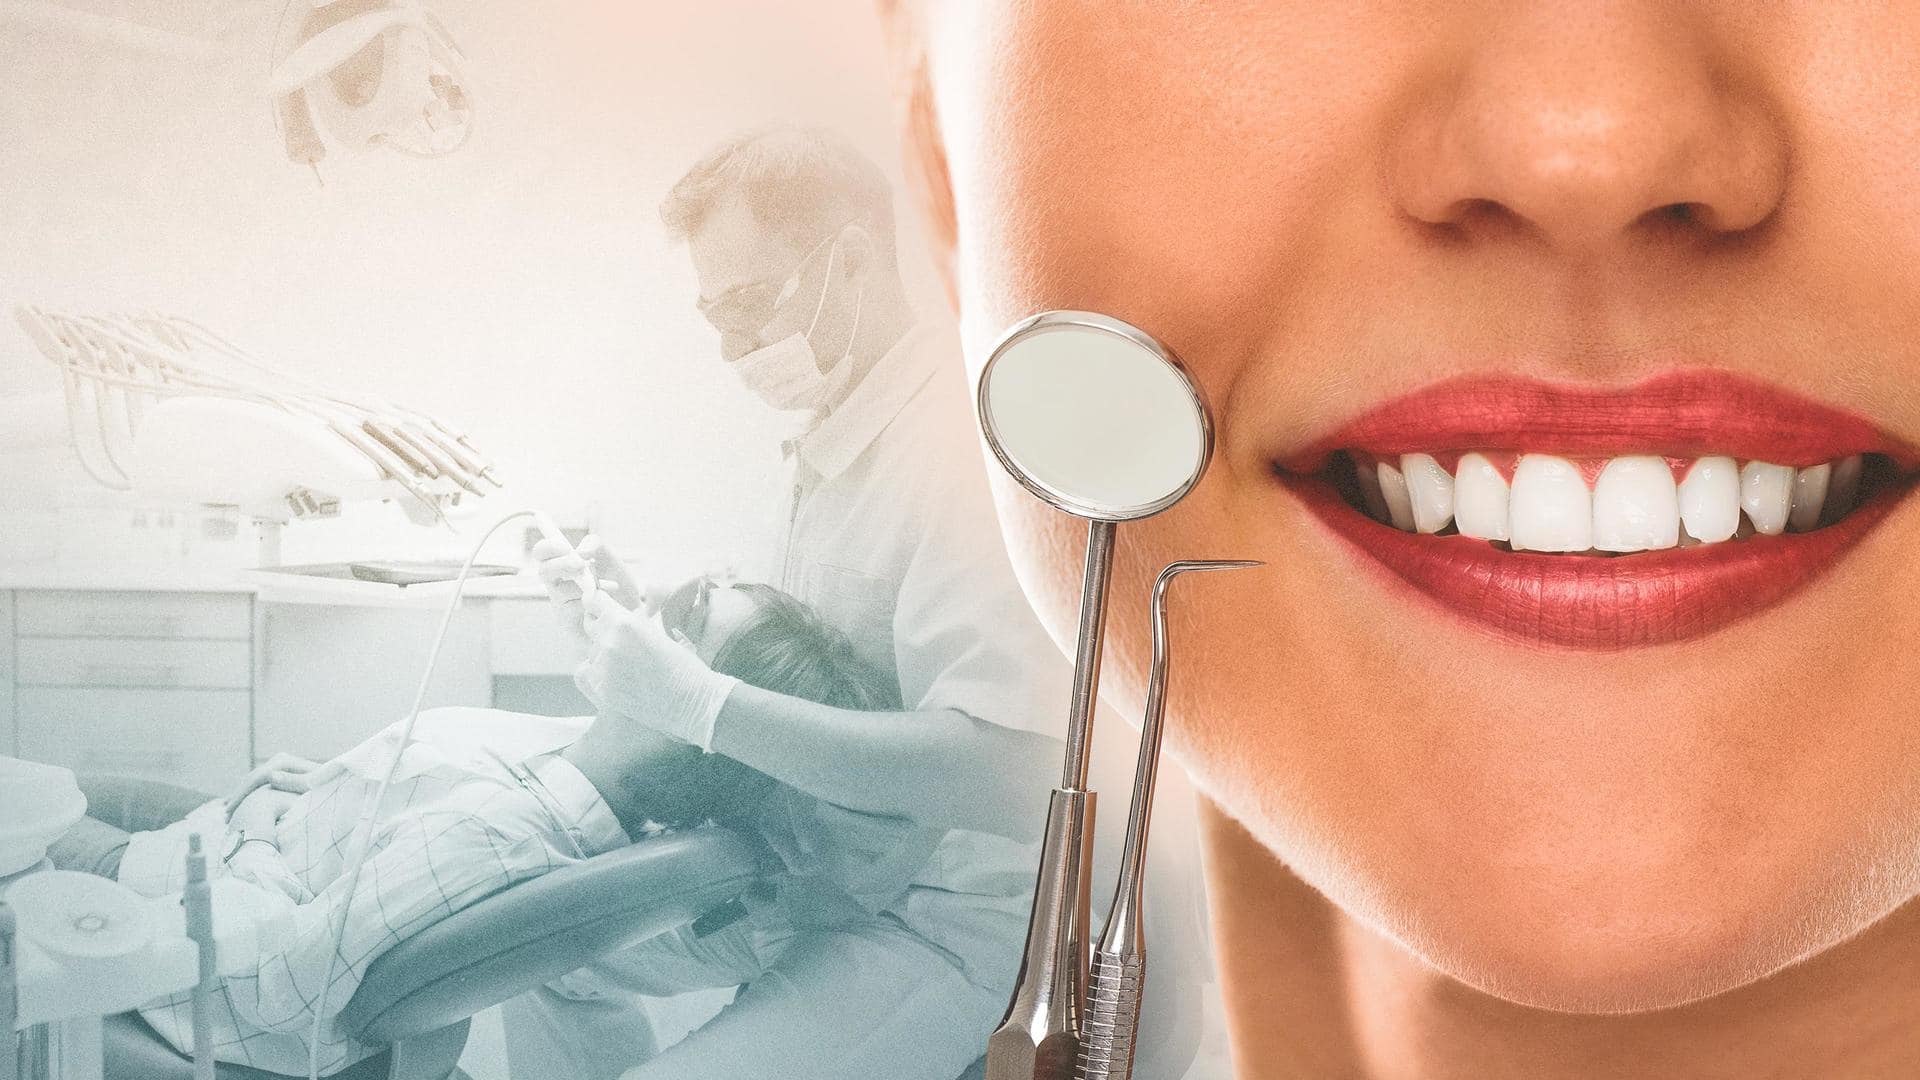 Leading cosmetic dentists, surgeons in US for that perfect smile